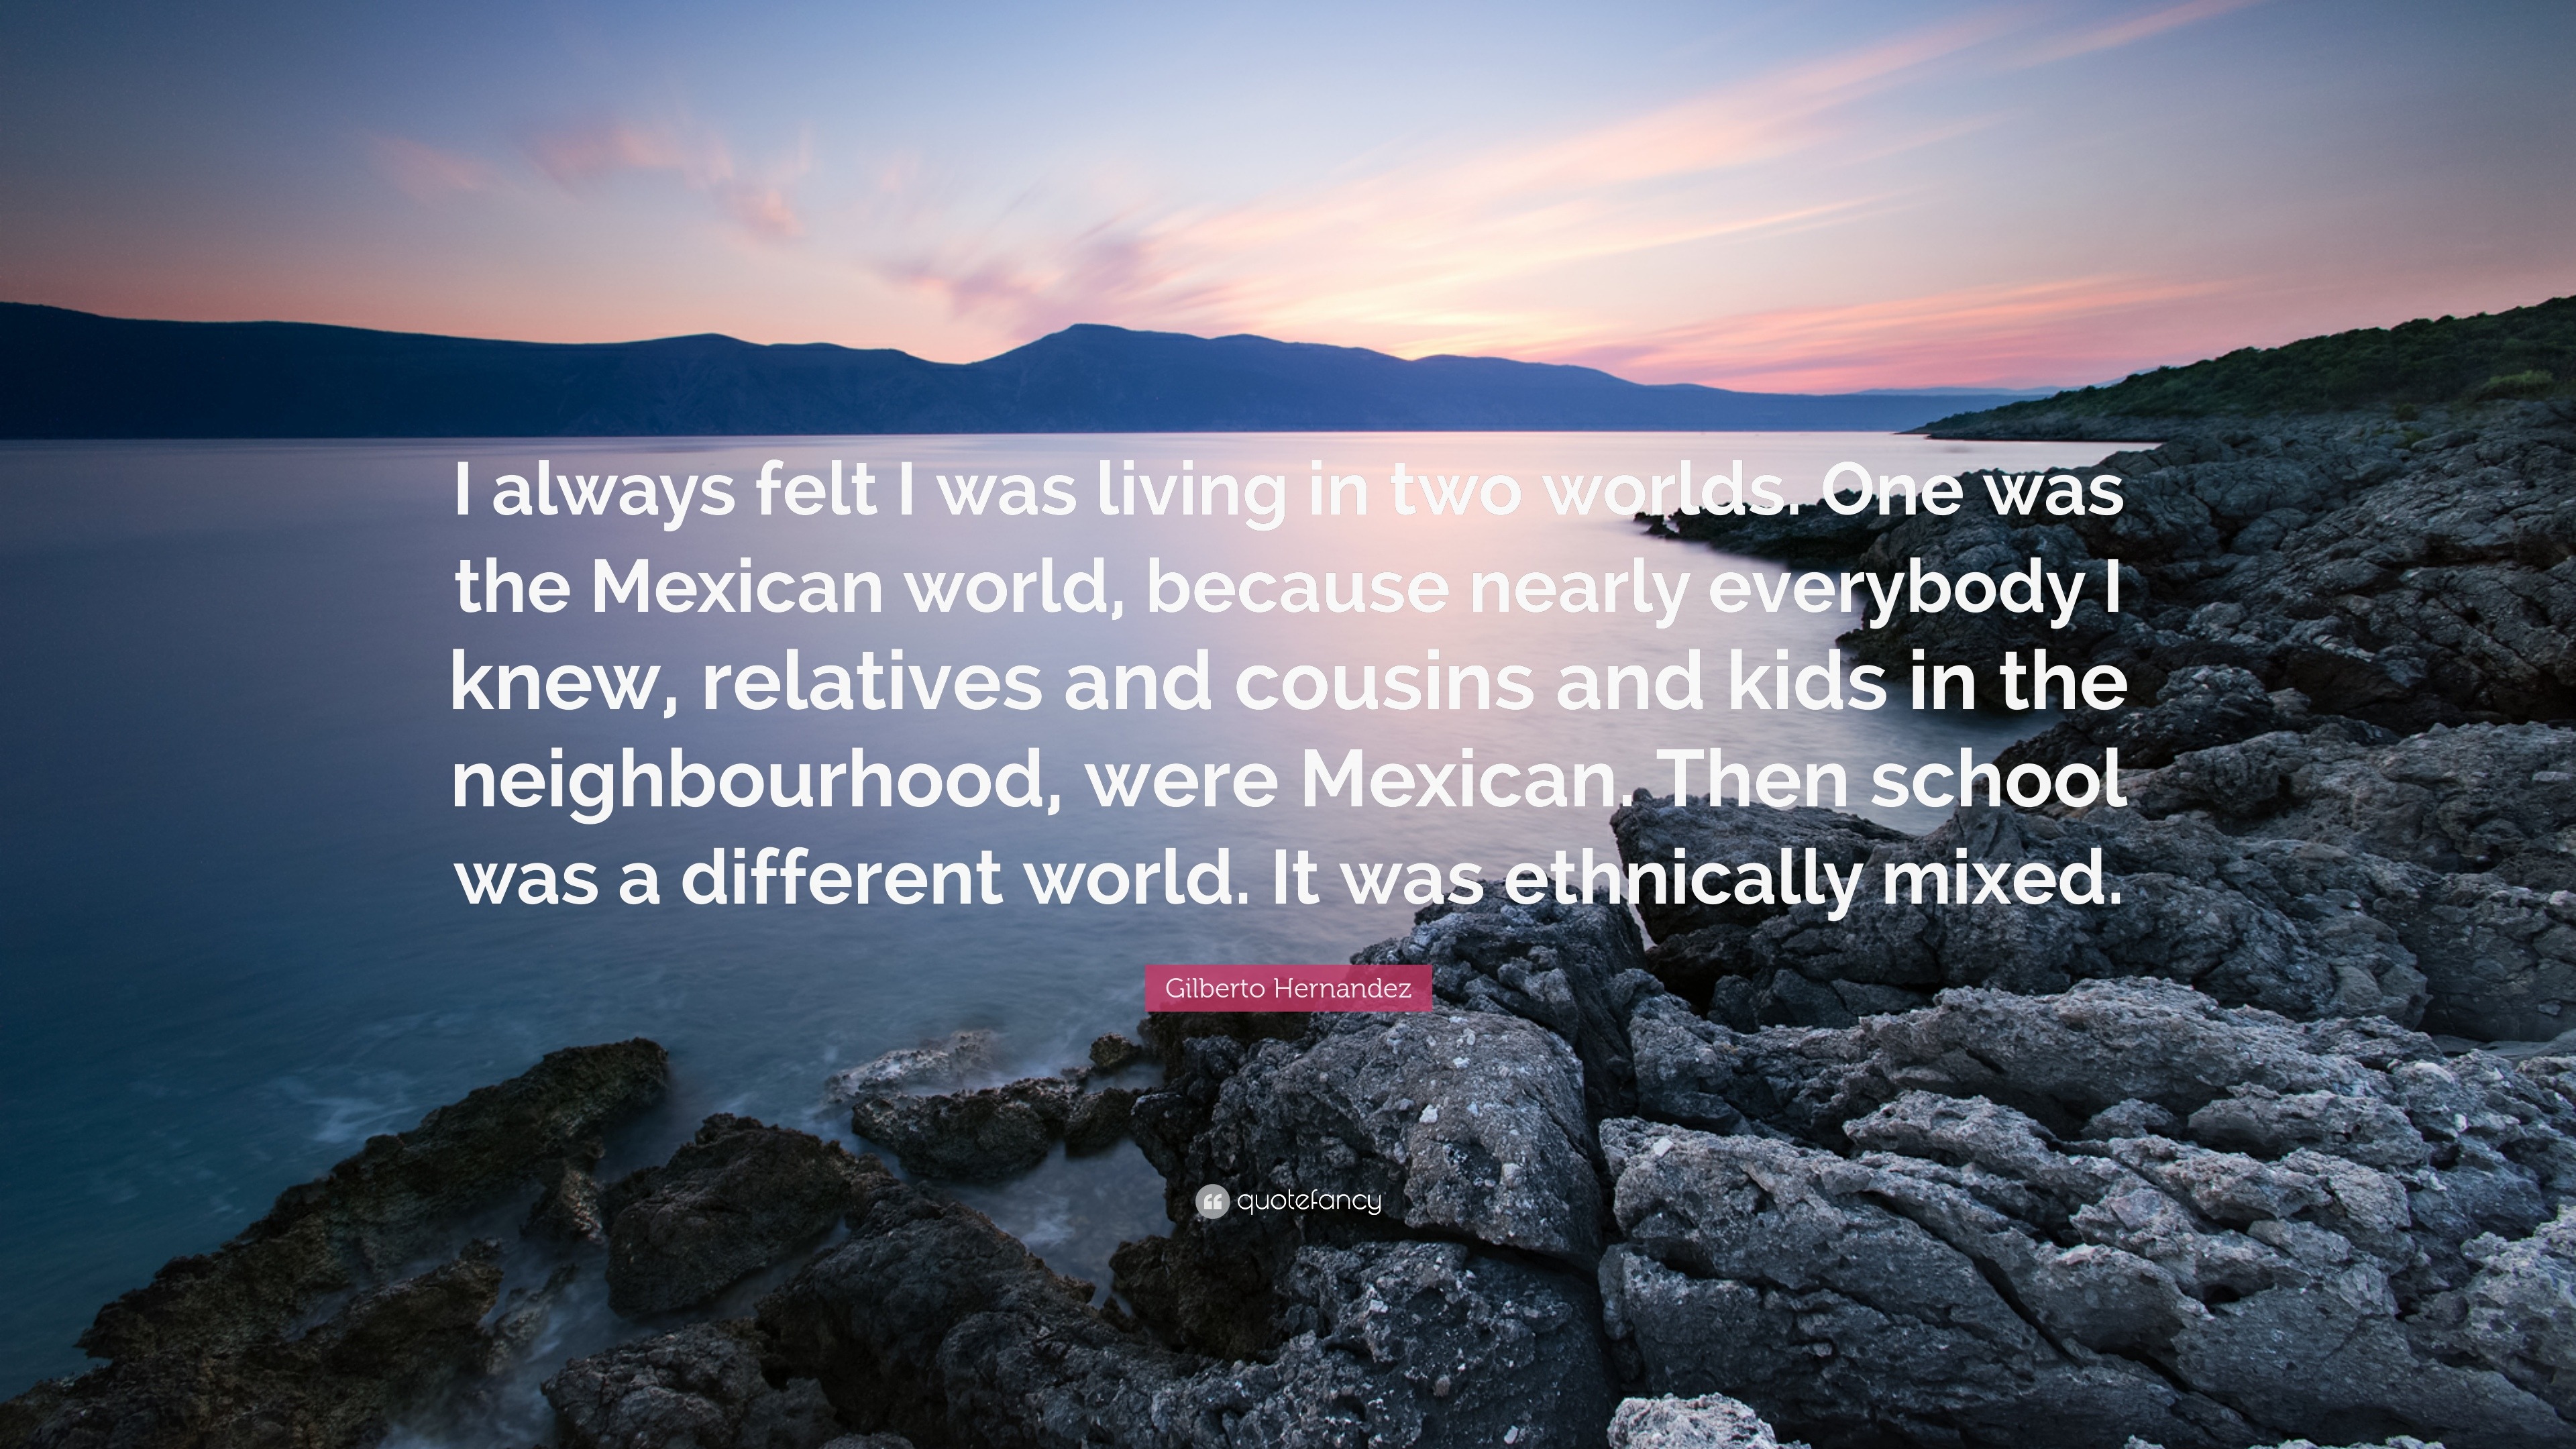 Gilberto Hernandez Quote: “I always felt I was living in two worlds ...